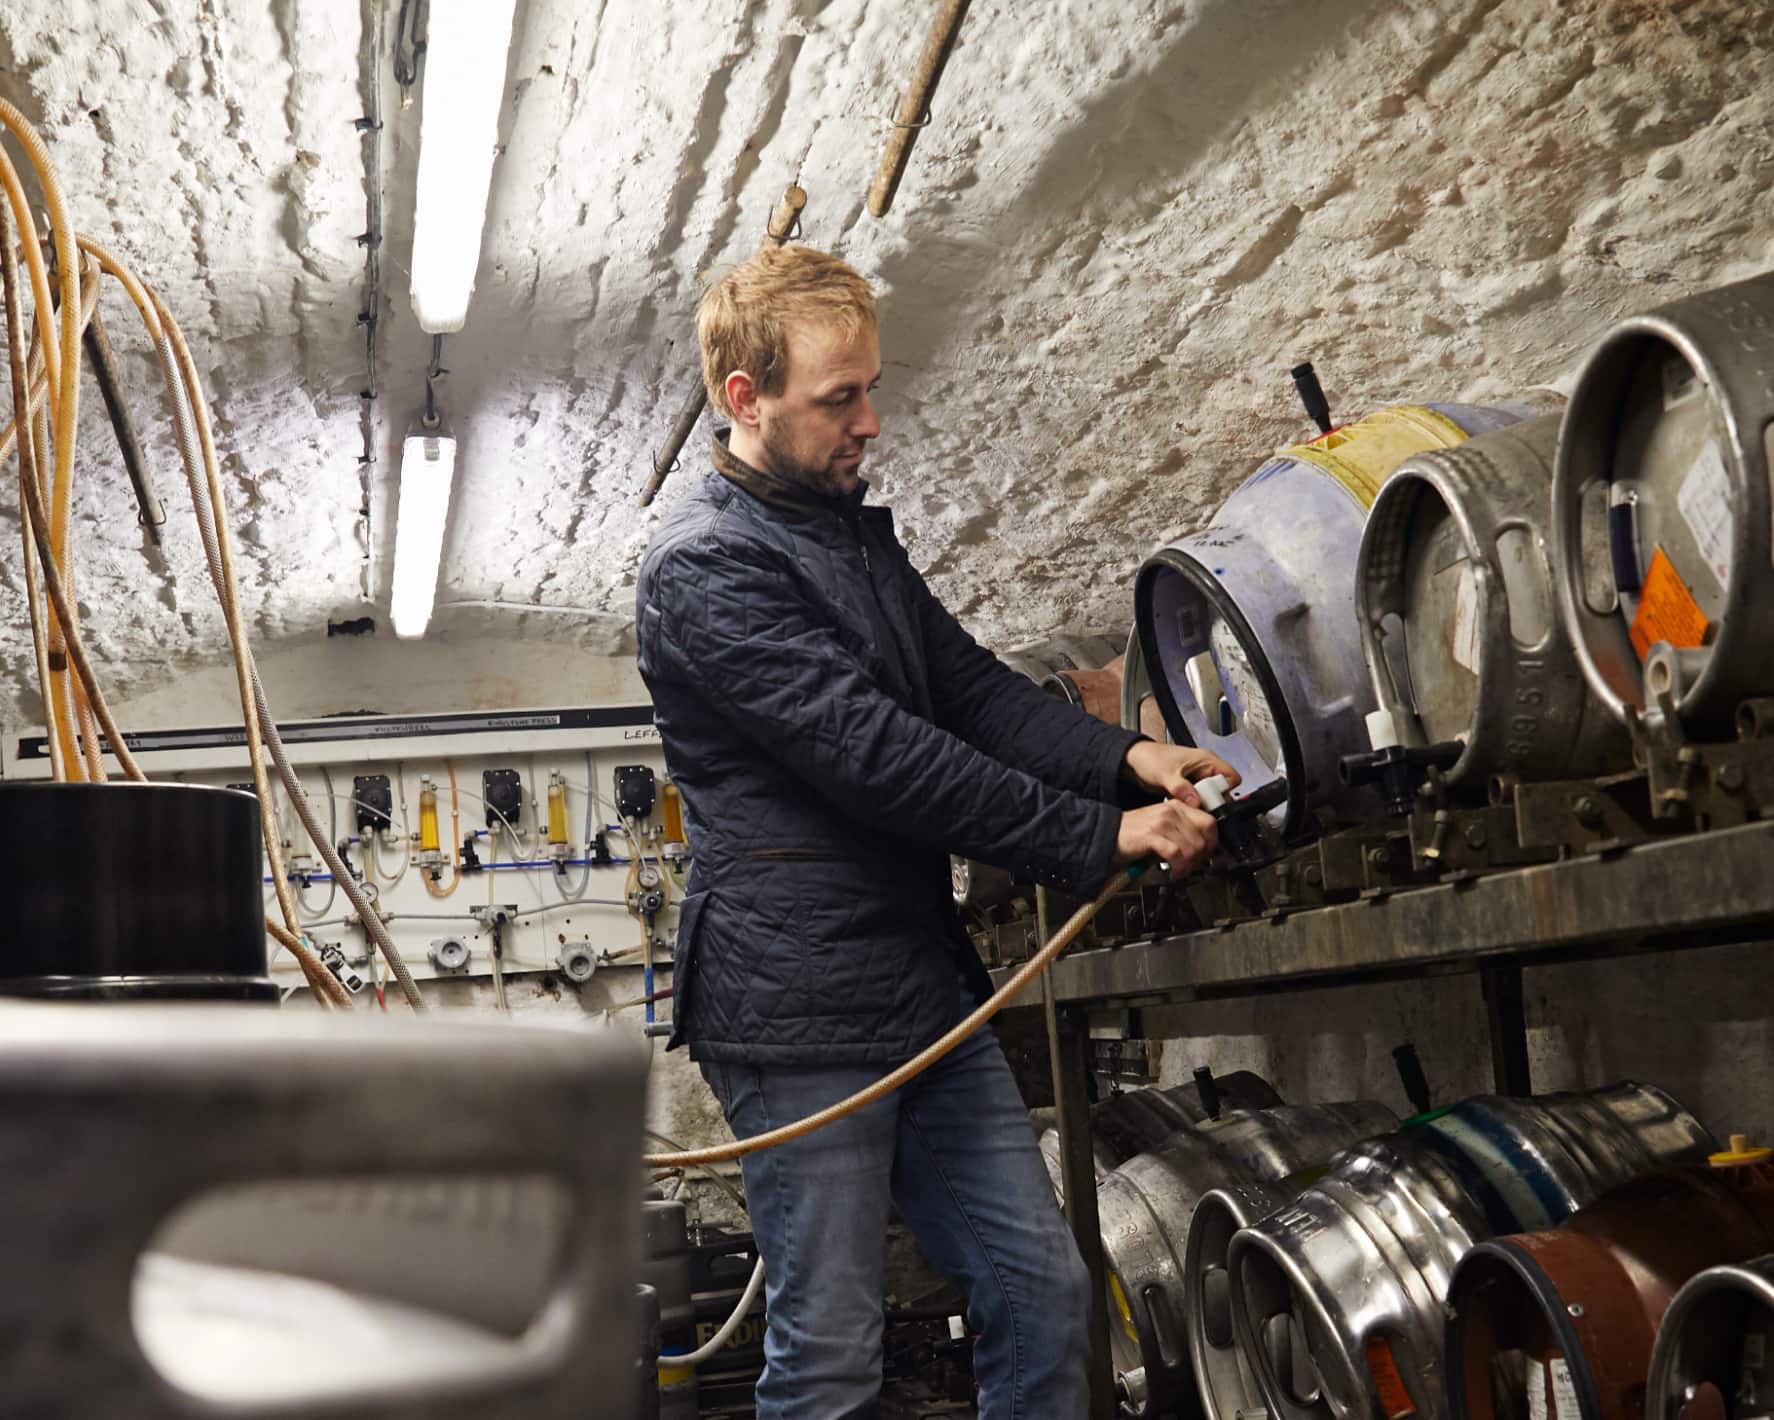 Dan working in his wine cellar. Xero accounting software helped his business go paperless.